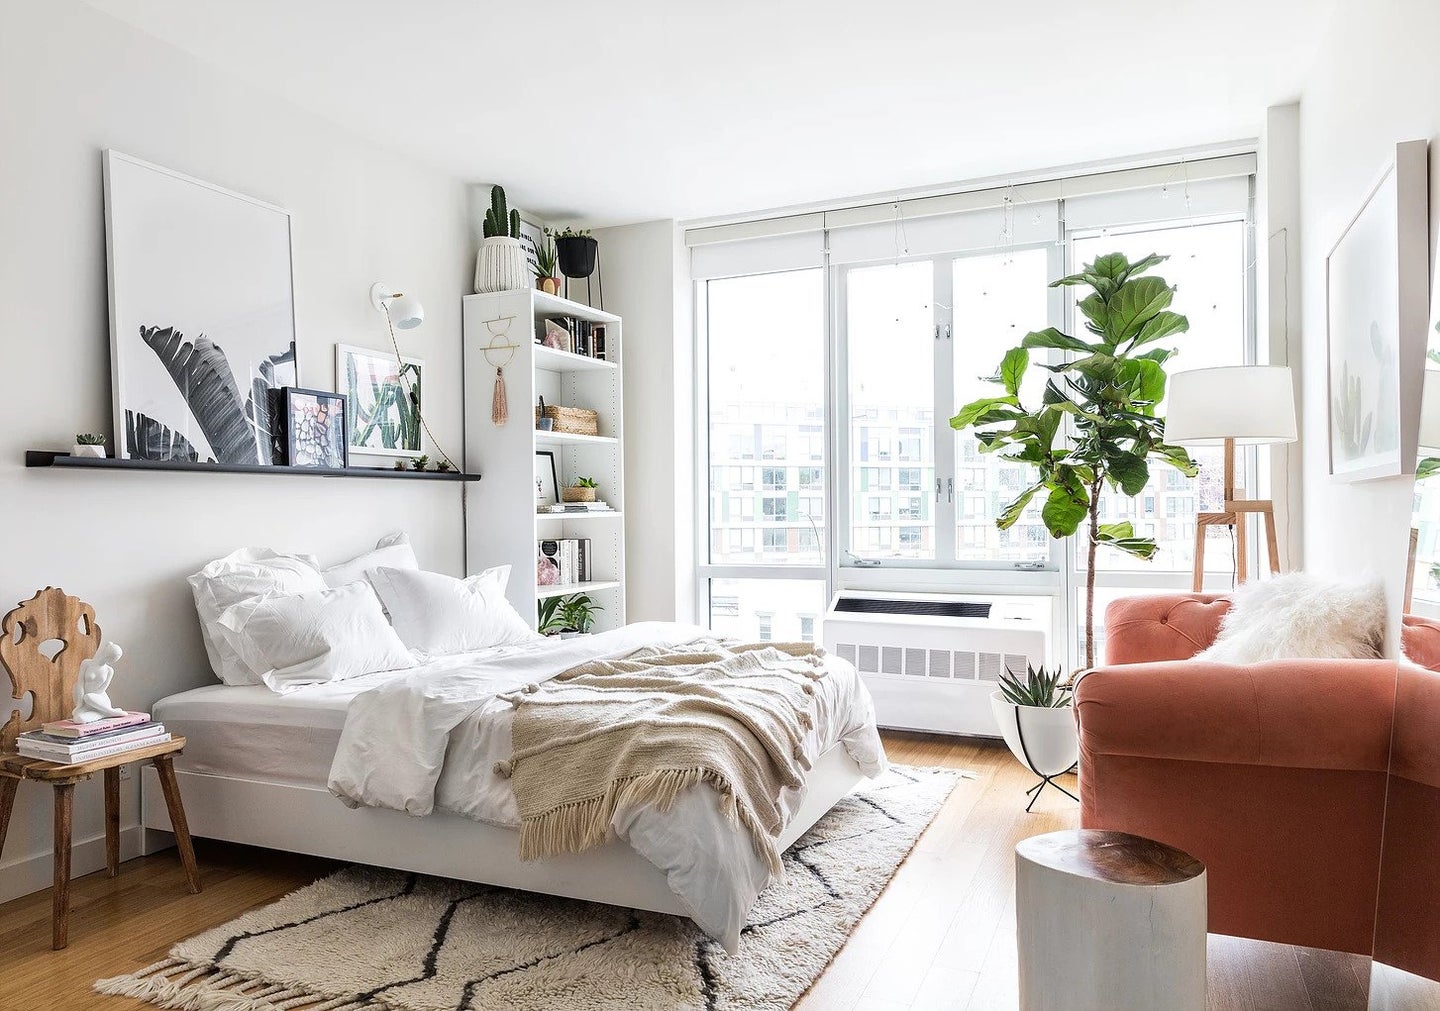 Outdated Apartment Decorating Ideas to Make Your Space Feel Fresh